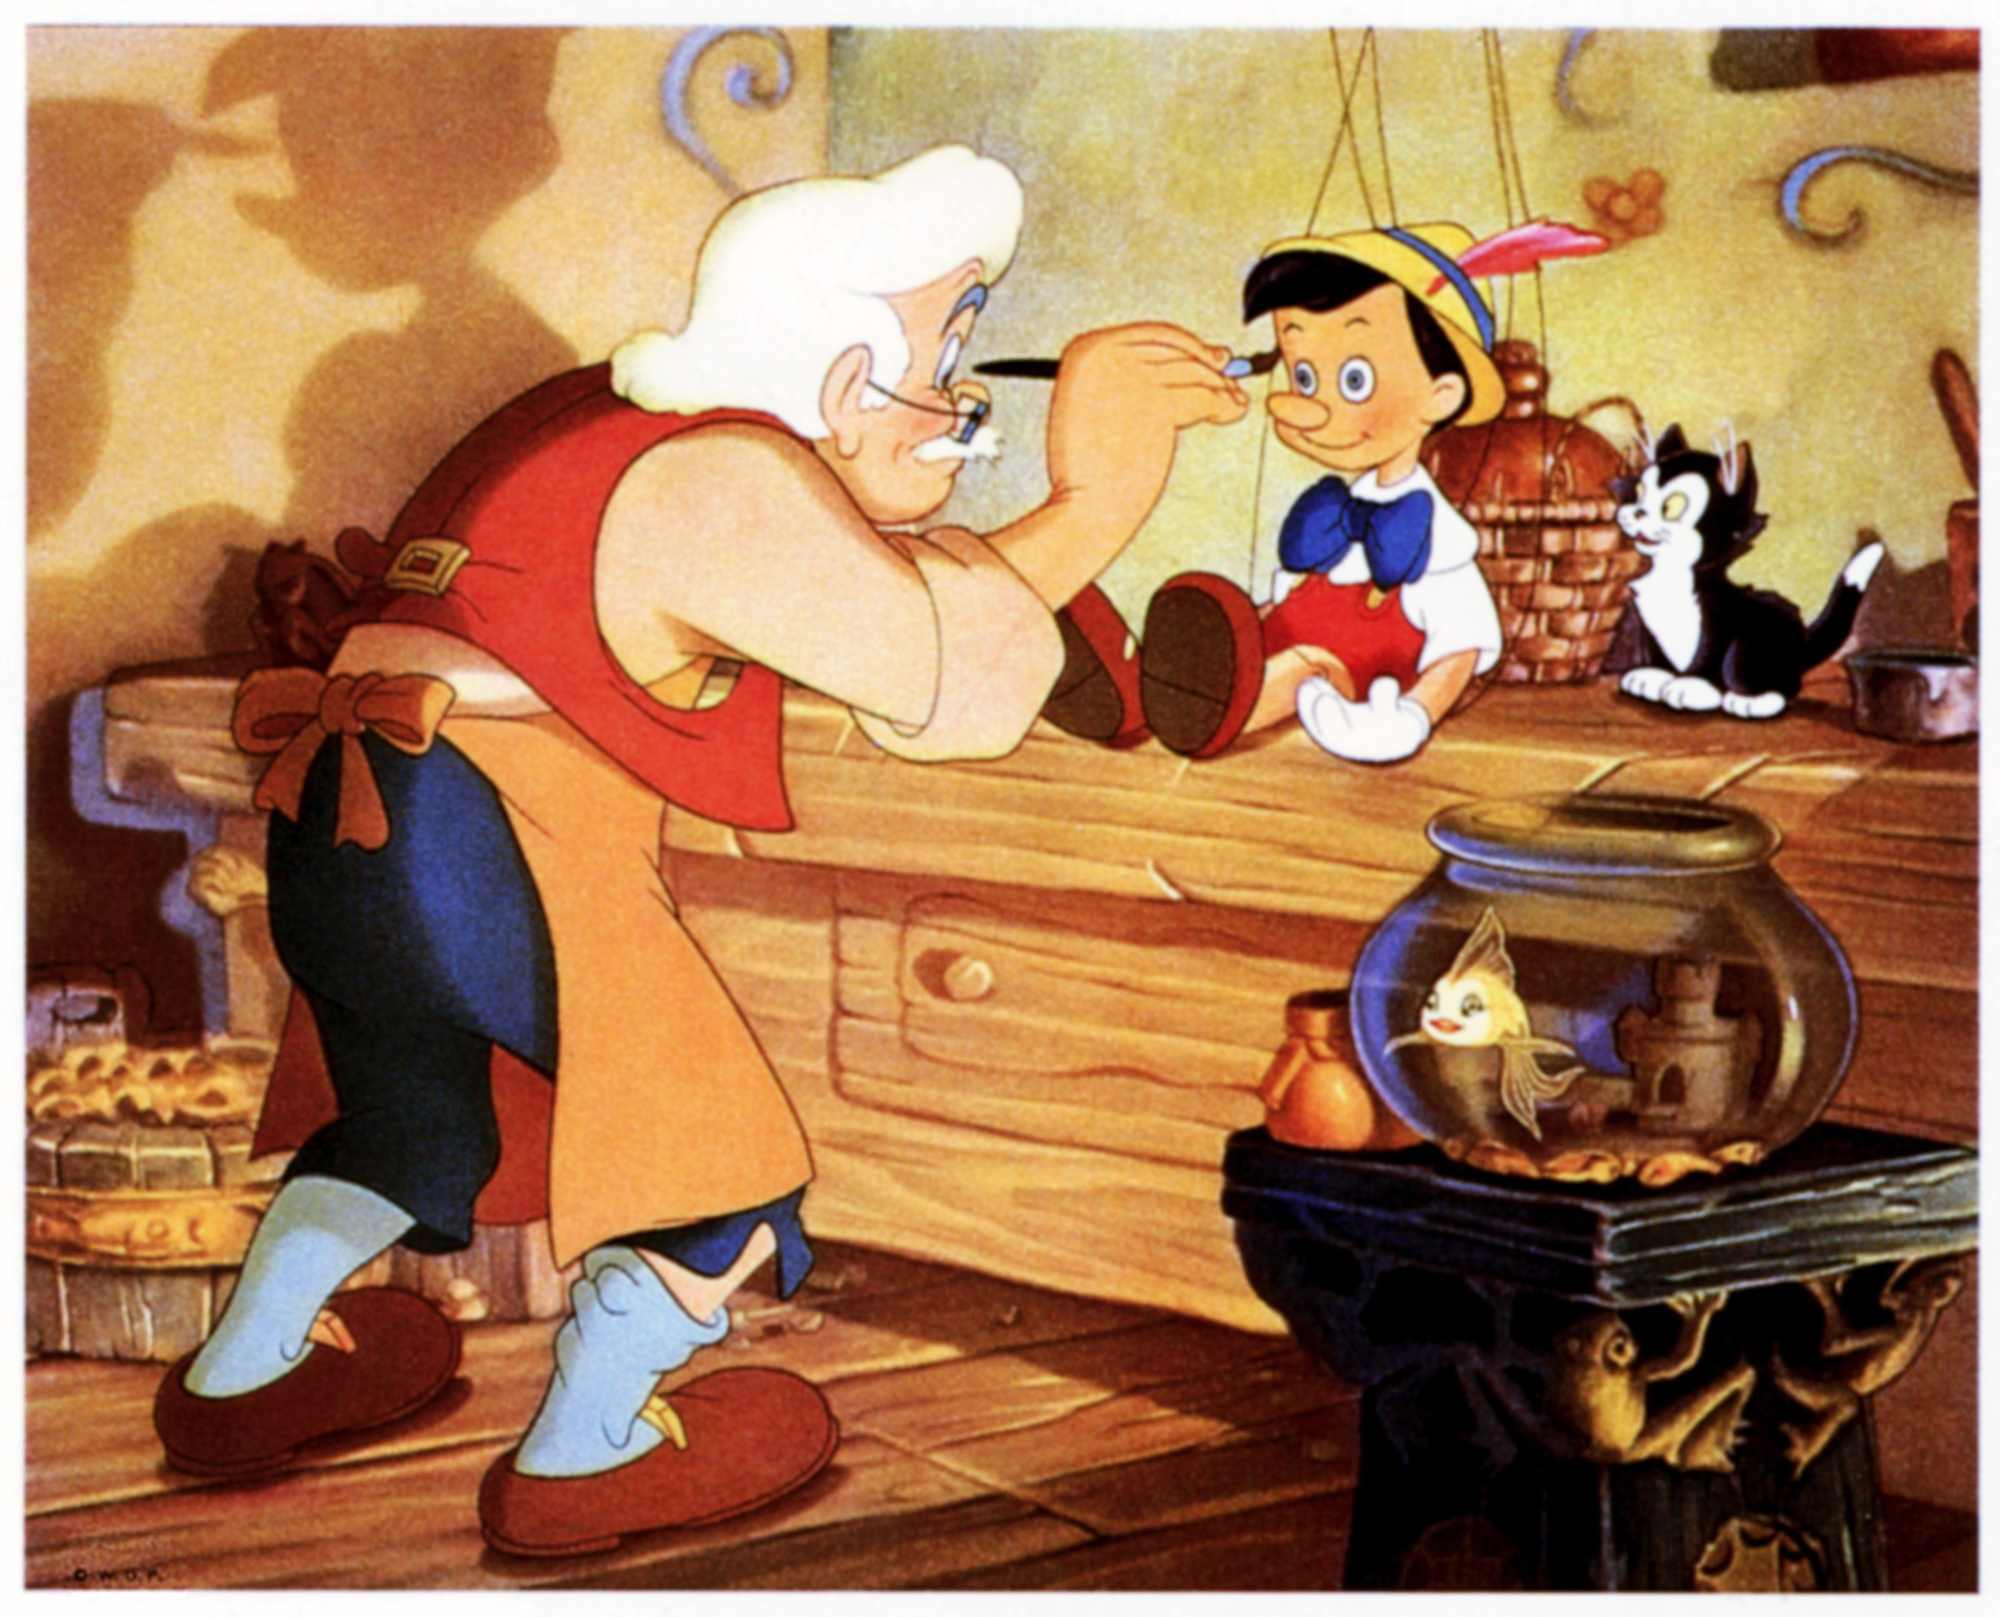 Box office flop 'Pinocchio' Gepetto (voiced by Christian Rub), Pinocchio (voiced by Dickie Jones), and Figario (voiced by Clarence Nash), and Cleo. Gepetto is using a tool on Pinocchio on the workshop table.